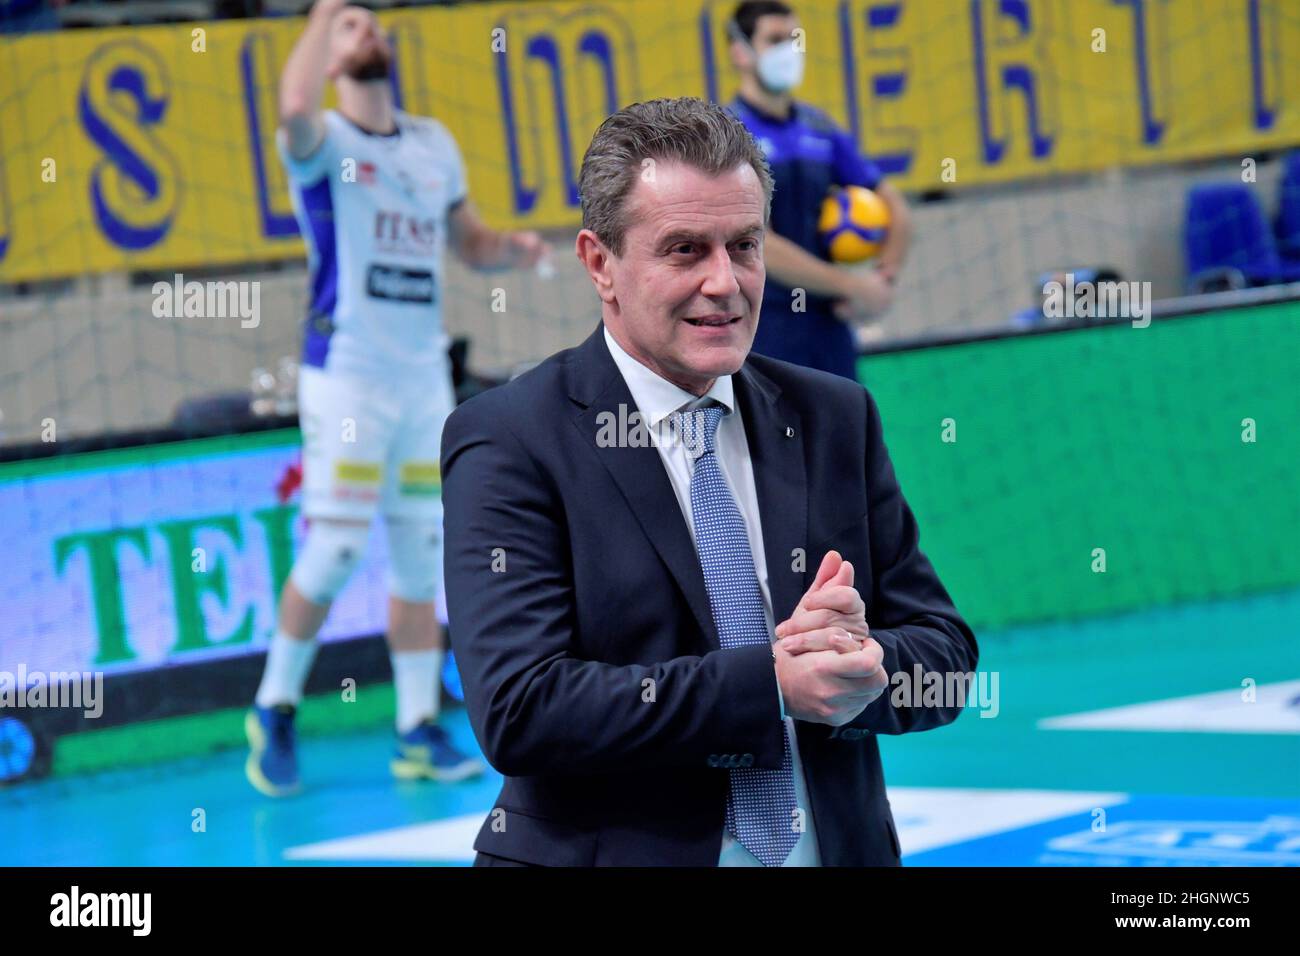 Trento, Italy. 22nd Jan, 2022. Coach Angelo Lorenzetti (Itas Trentino) during Itas Trentino Volley vs Consar Ravenna, Volleyball Italian Serie A Men Superleague Championship in Trento, Italy, January 22 2022 Credit: Independent Photo Agency/Alamy Live News Stock Photo